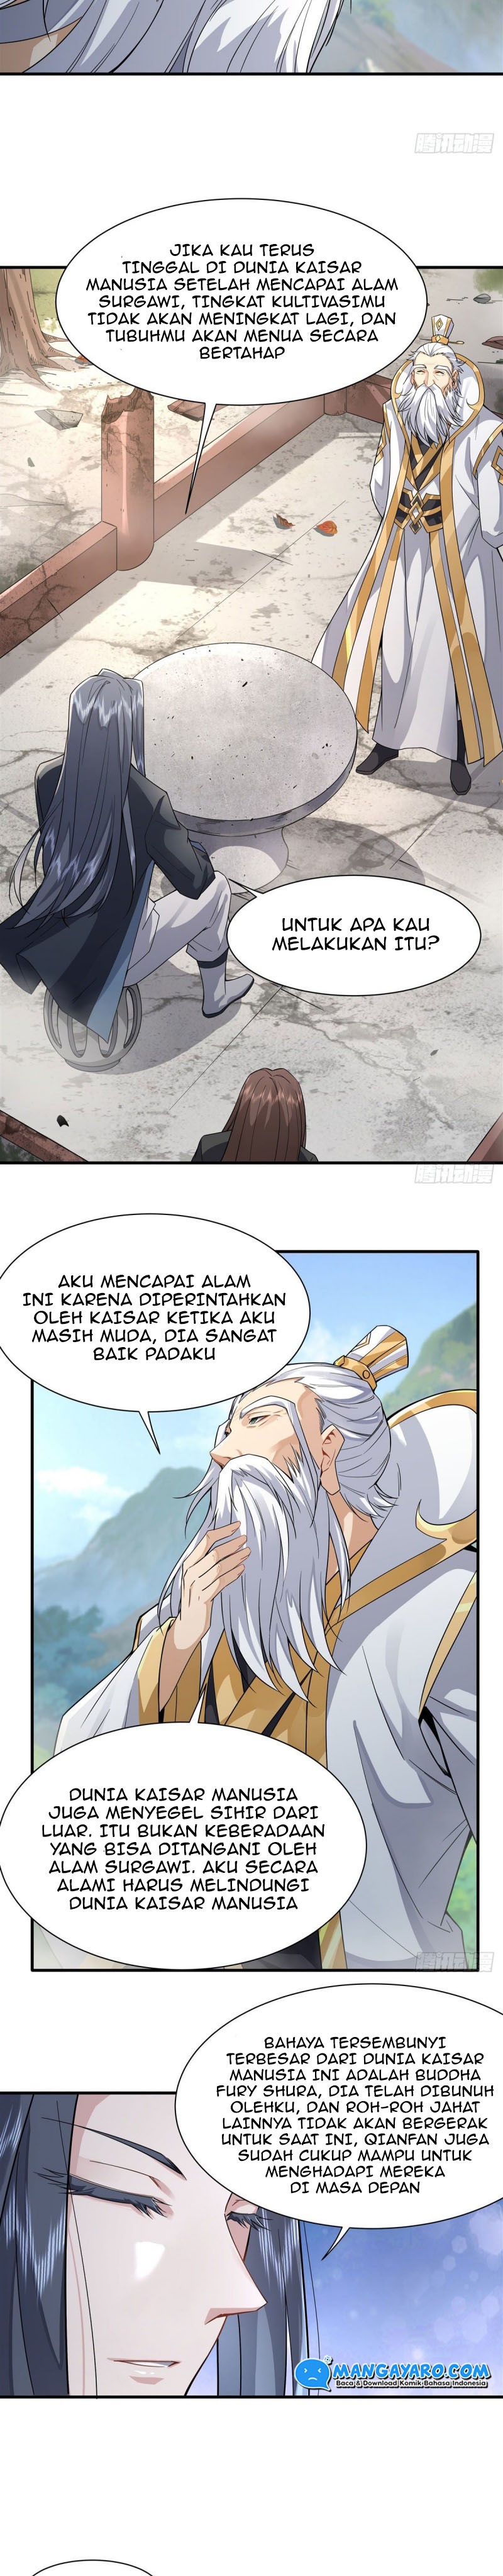 Dilarang COPAS - situs resmi www.mangacanblog.com - Komik my female apprentices are all big shots from the future 031 - chapter 31 32 Indonesia my female apprentices are all big shots from the future 031 - chapter 31 Terbaru 2|Baca Manga Komik Indonesia|Mangacan